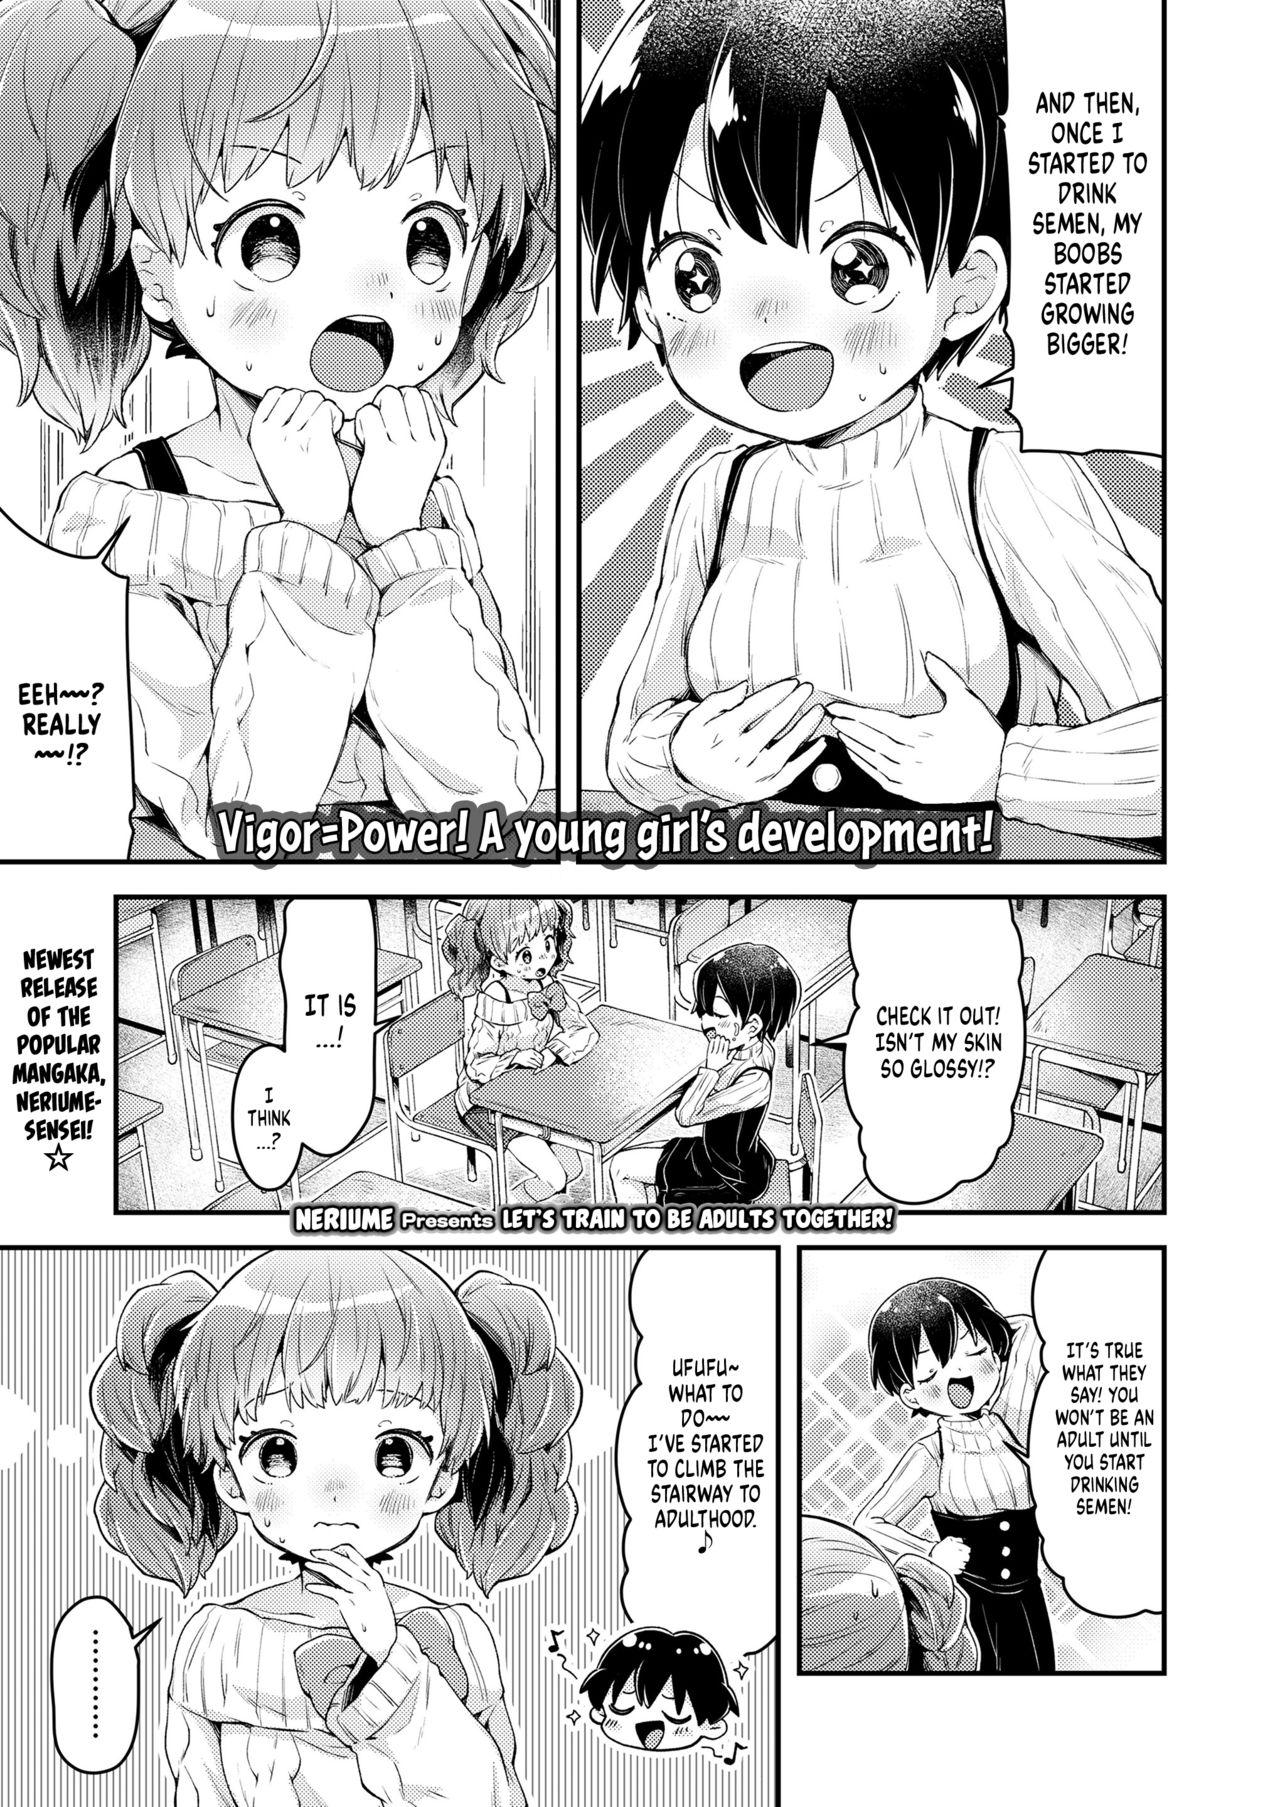 Gorgeous Issho ni Otona Training! | Let's Train to be Adults Together! 8teen - Page 1